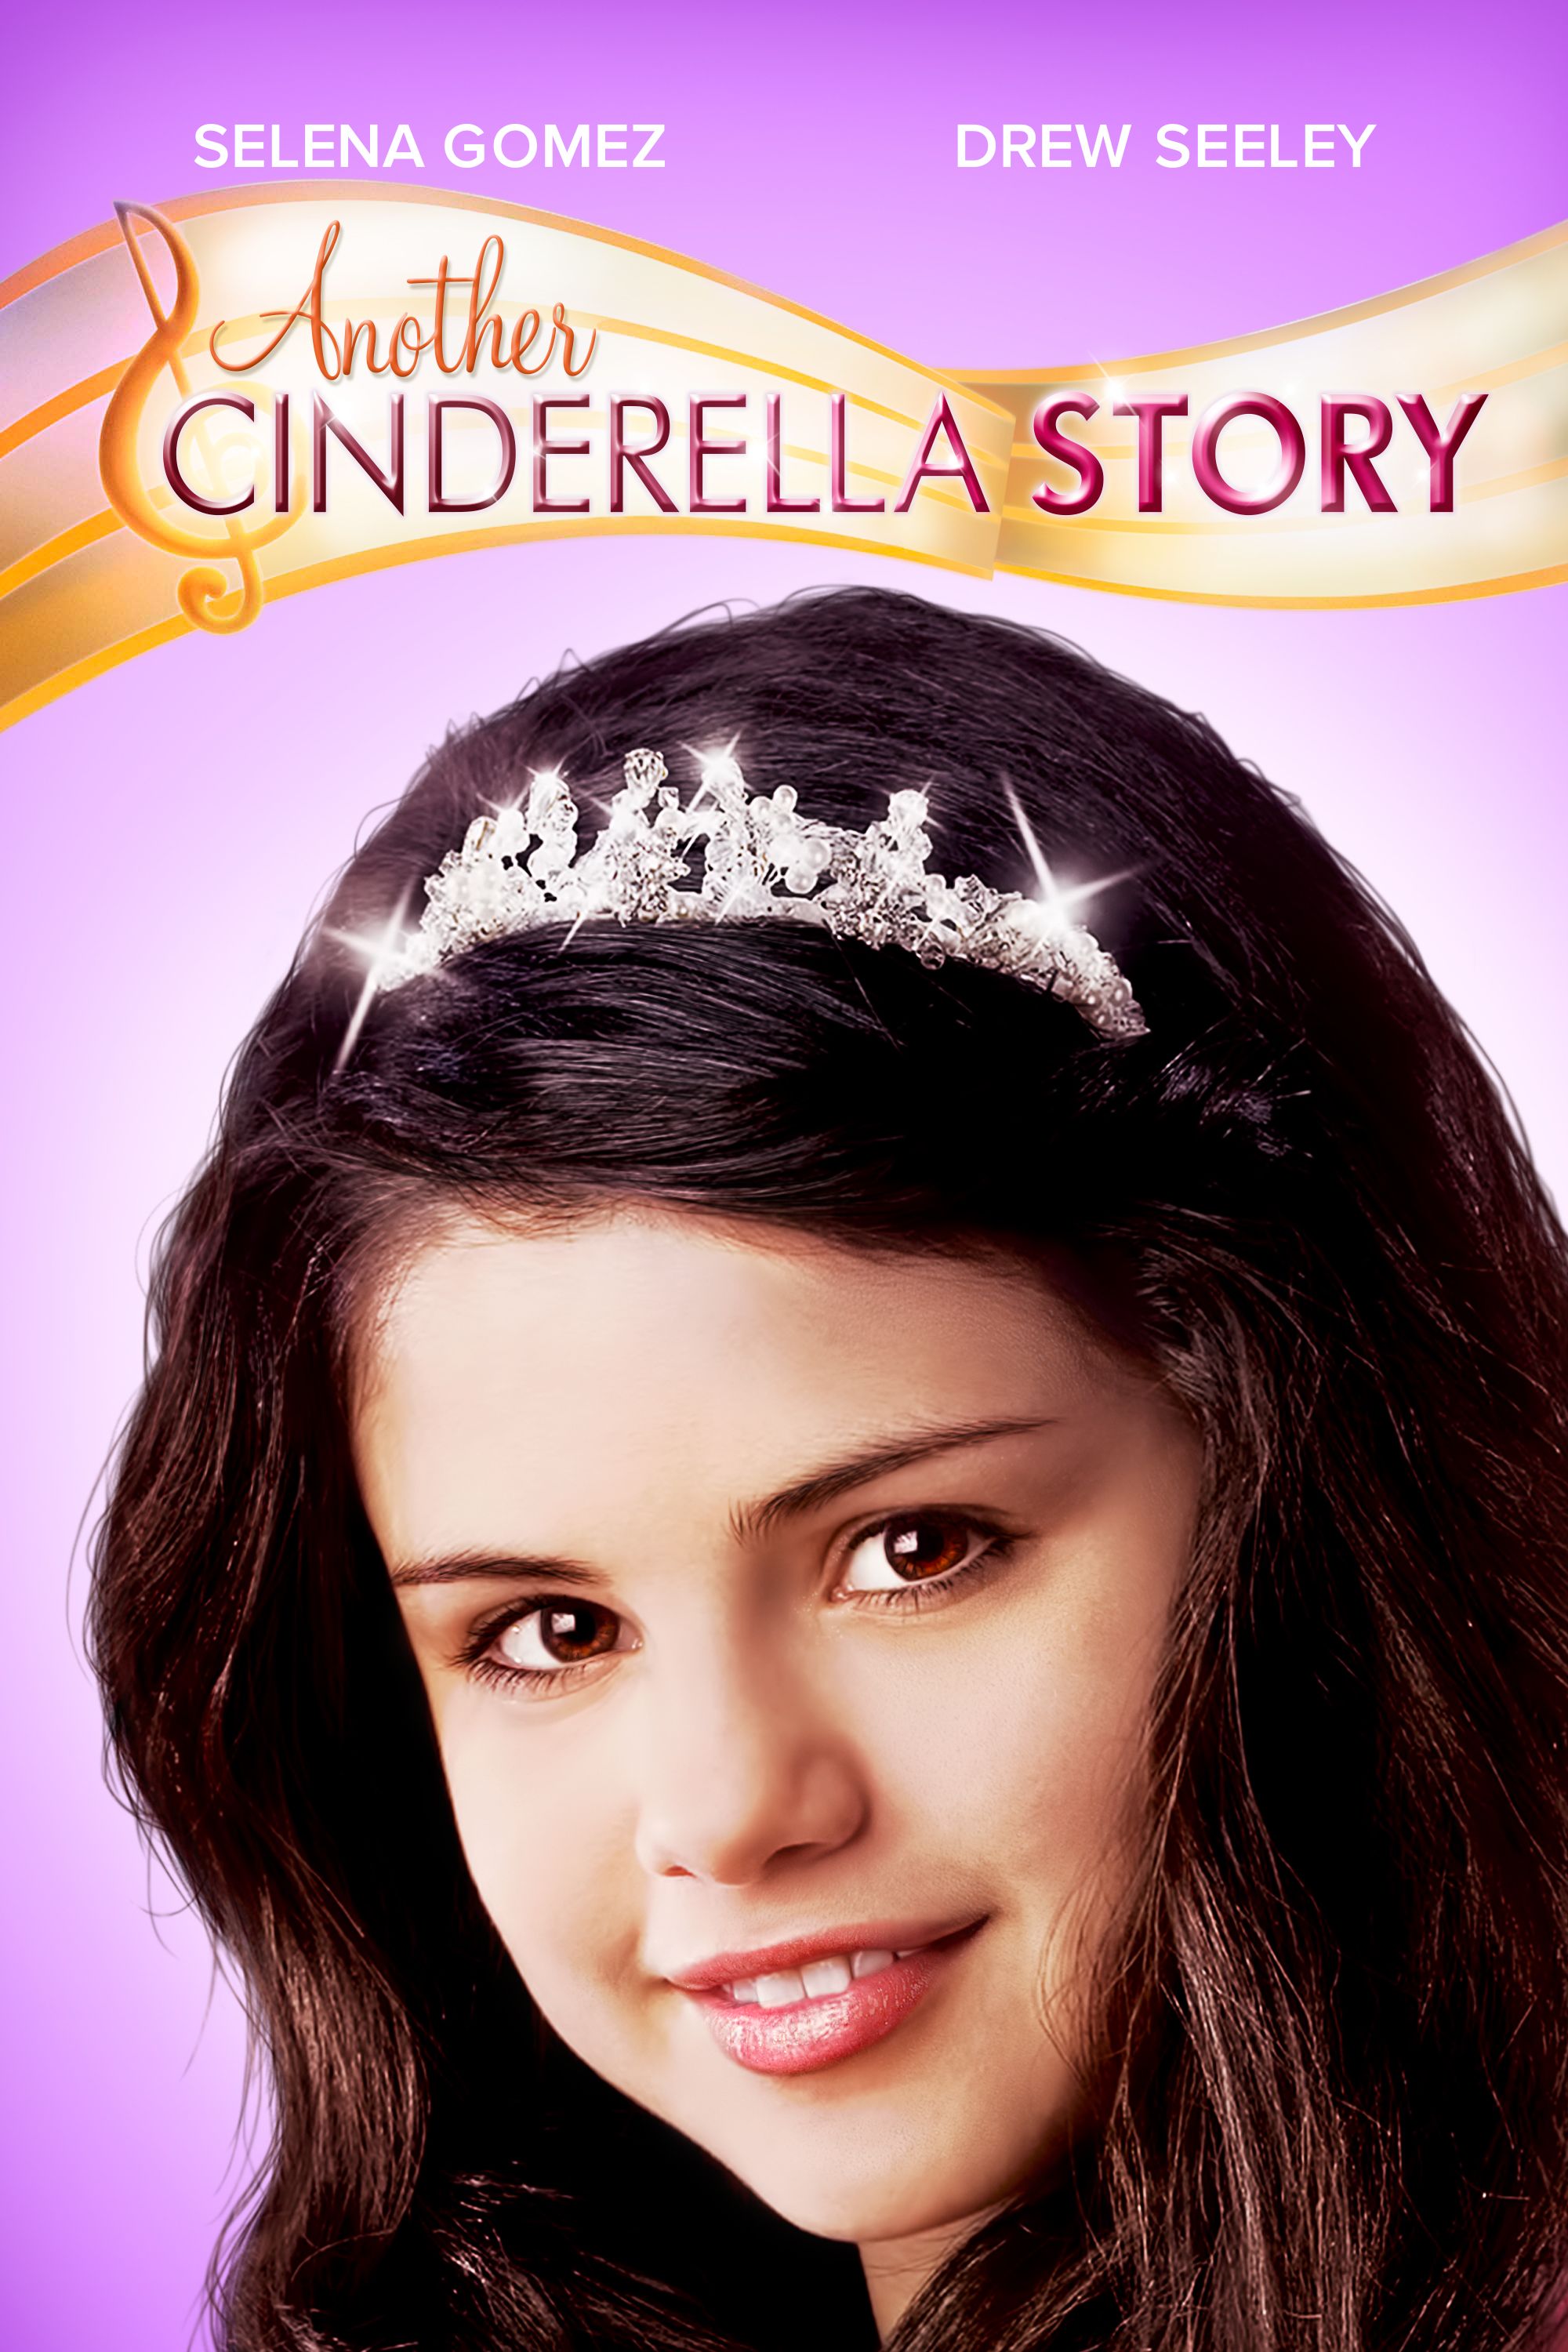 dawit mulugeta share another cinderella story full movie free photos